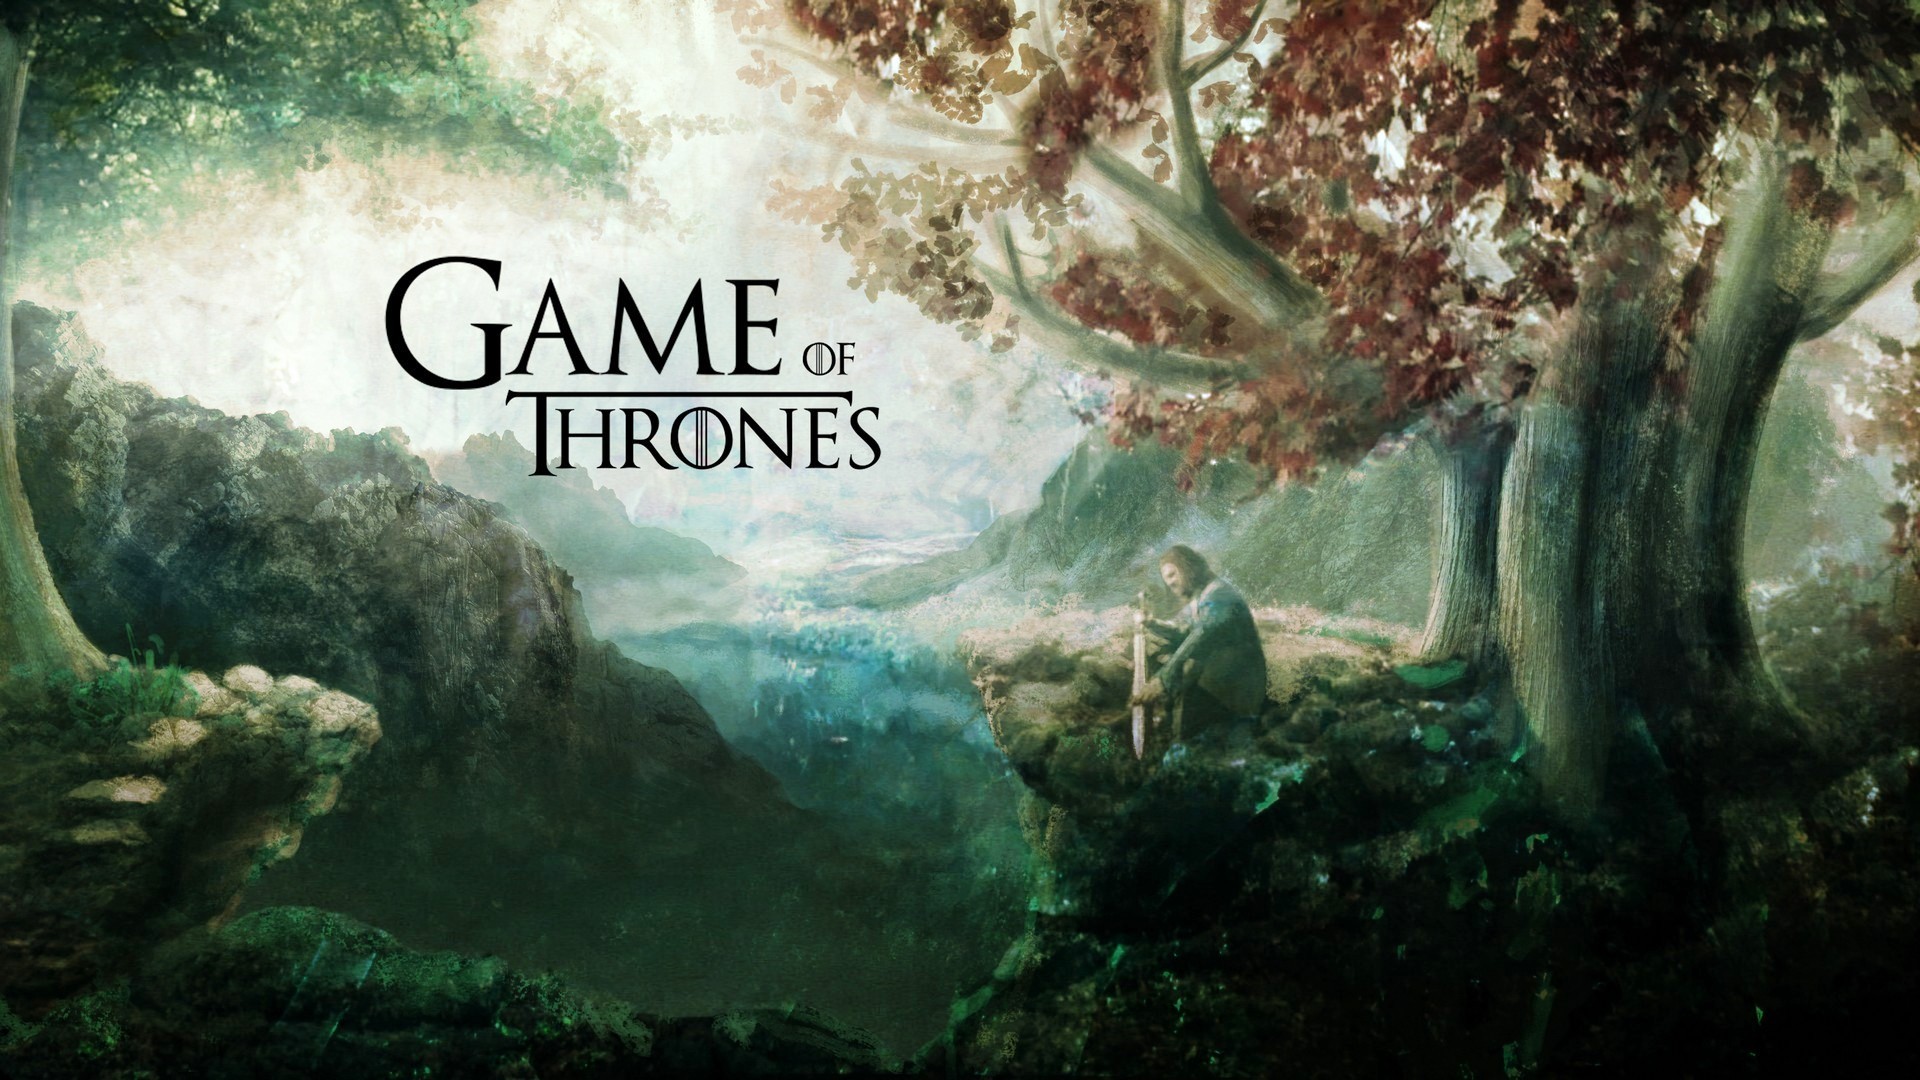 Full Movie Game of Thrones Wallpaper With high-resolution 1920X1080 pixel. You can use this poster wallpaper for your Desktop Computers, Mac Screensavers, Windows Backgrounds, iPhone Wallpapers, Tablet or Android Lock screen and another Mobile device